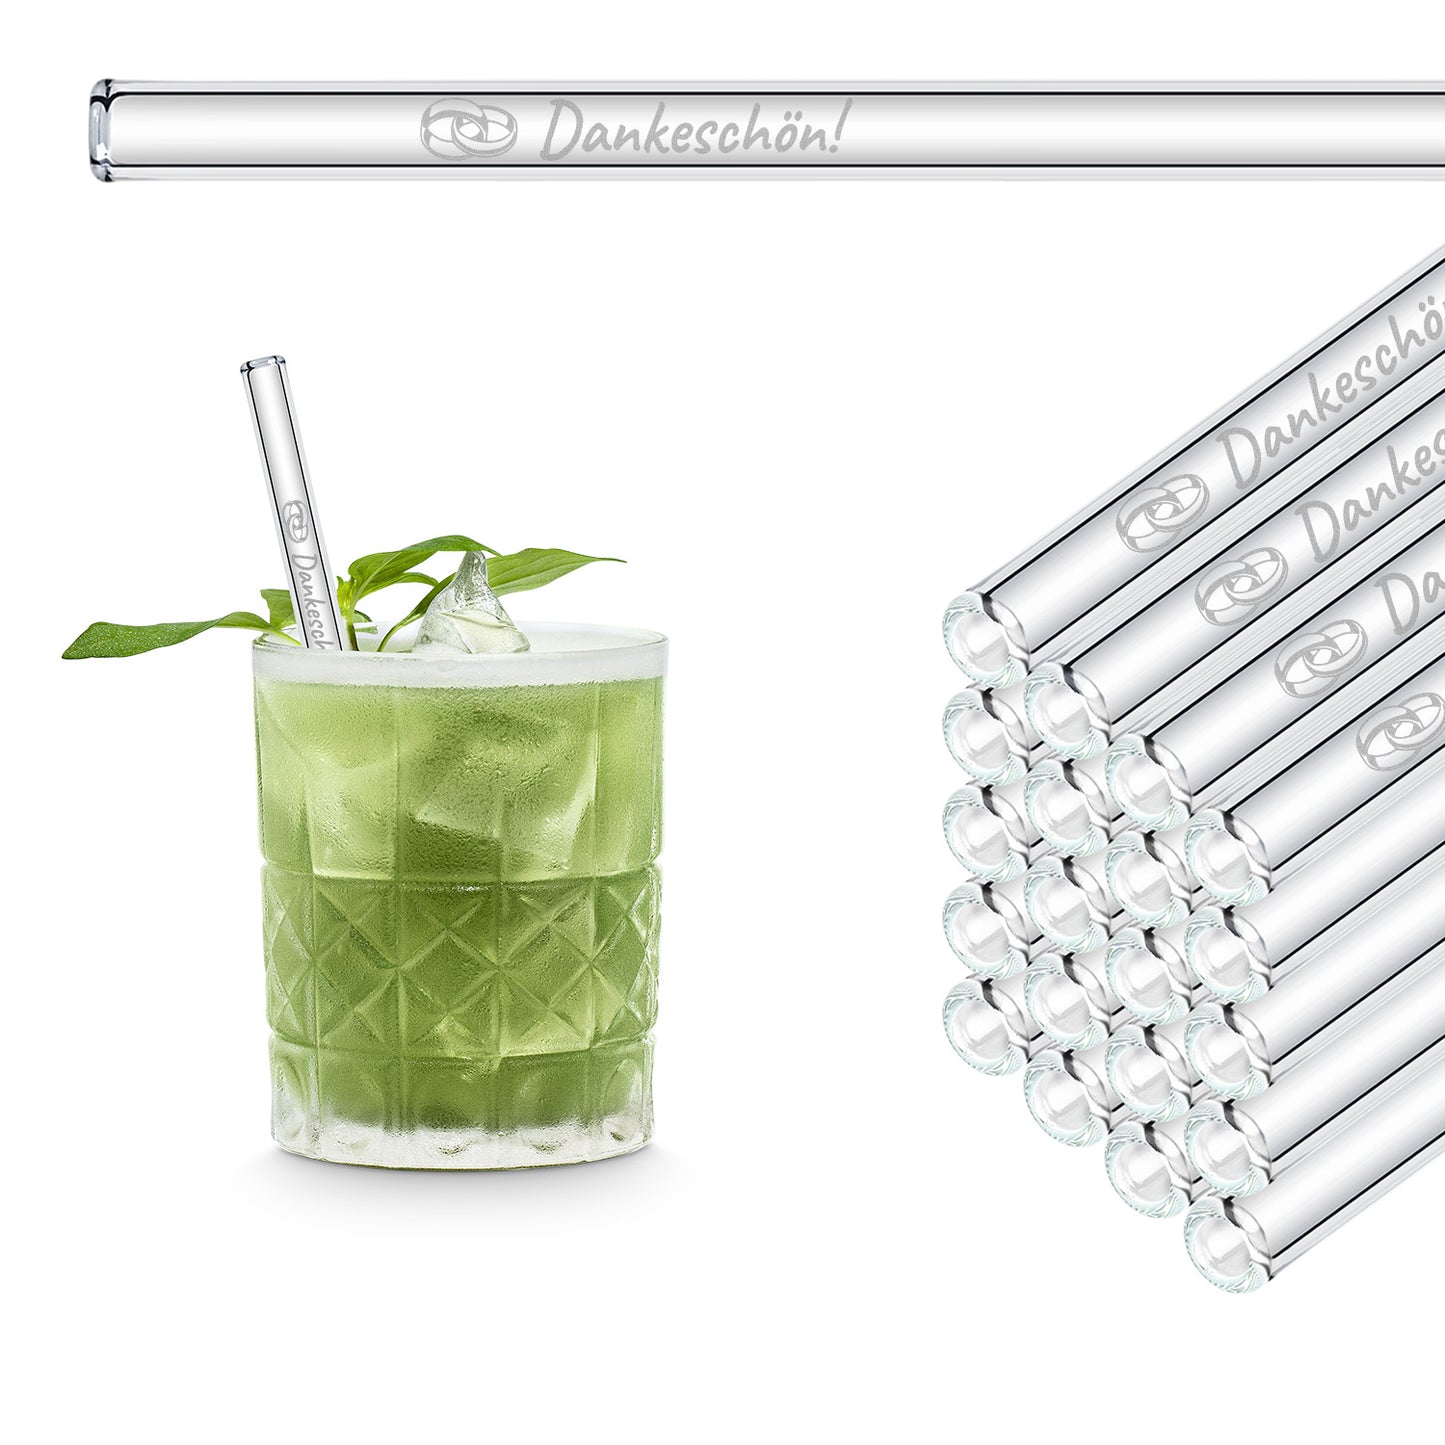 Thank you very much! 50x engraved glass straws - gift for wedding guests